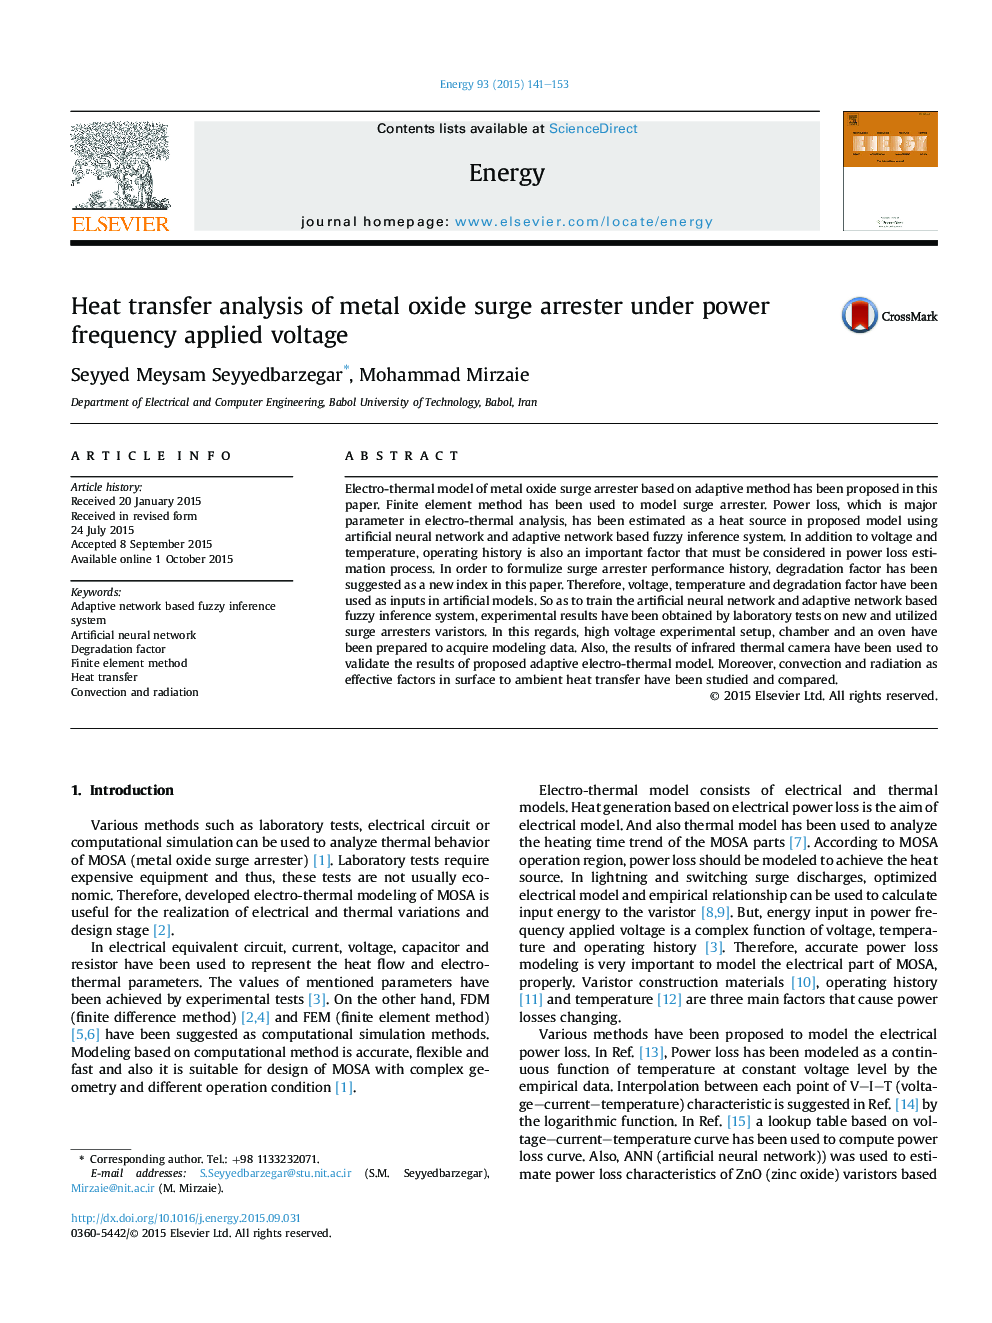 Heat transfer analysis of metal oxide surge arrester under power frequency applied voltage